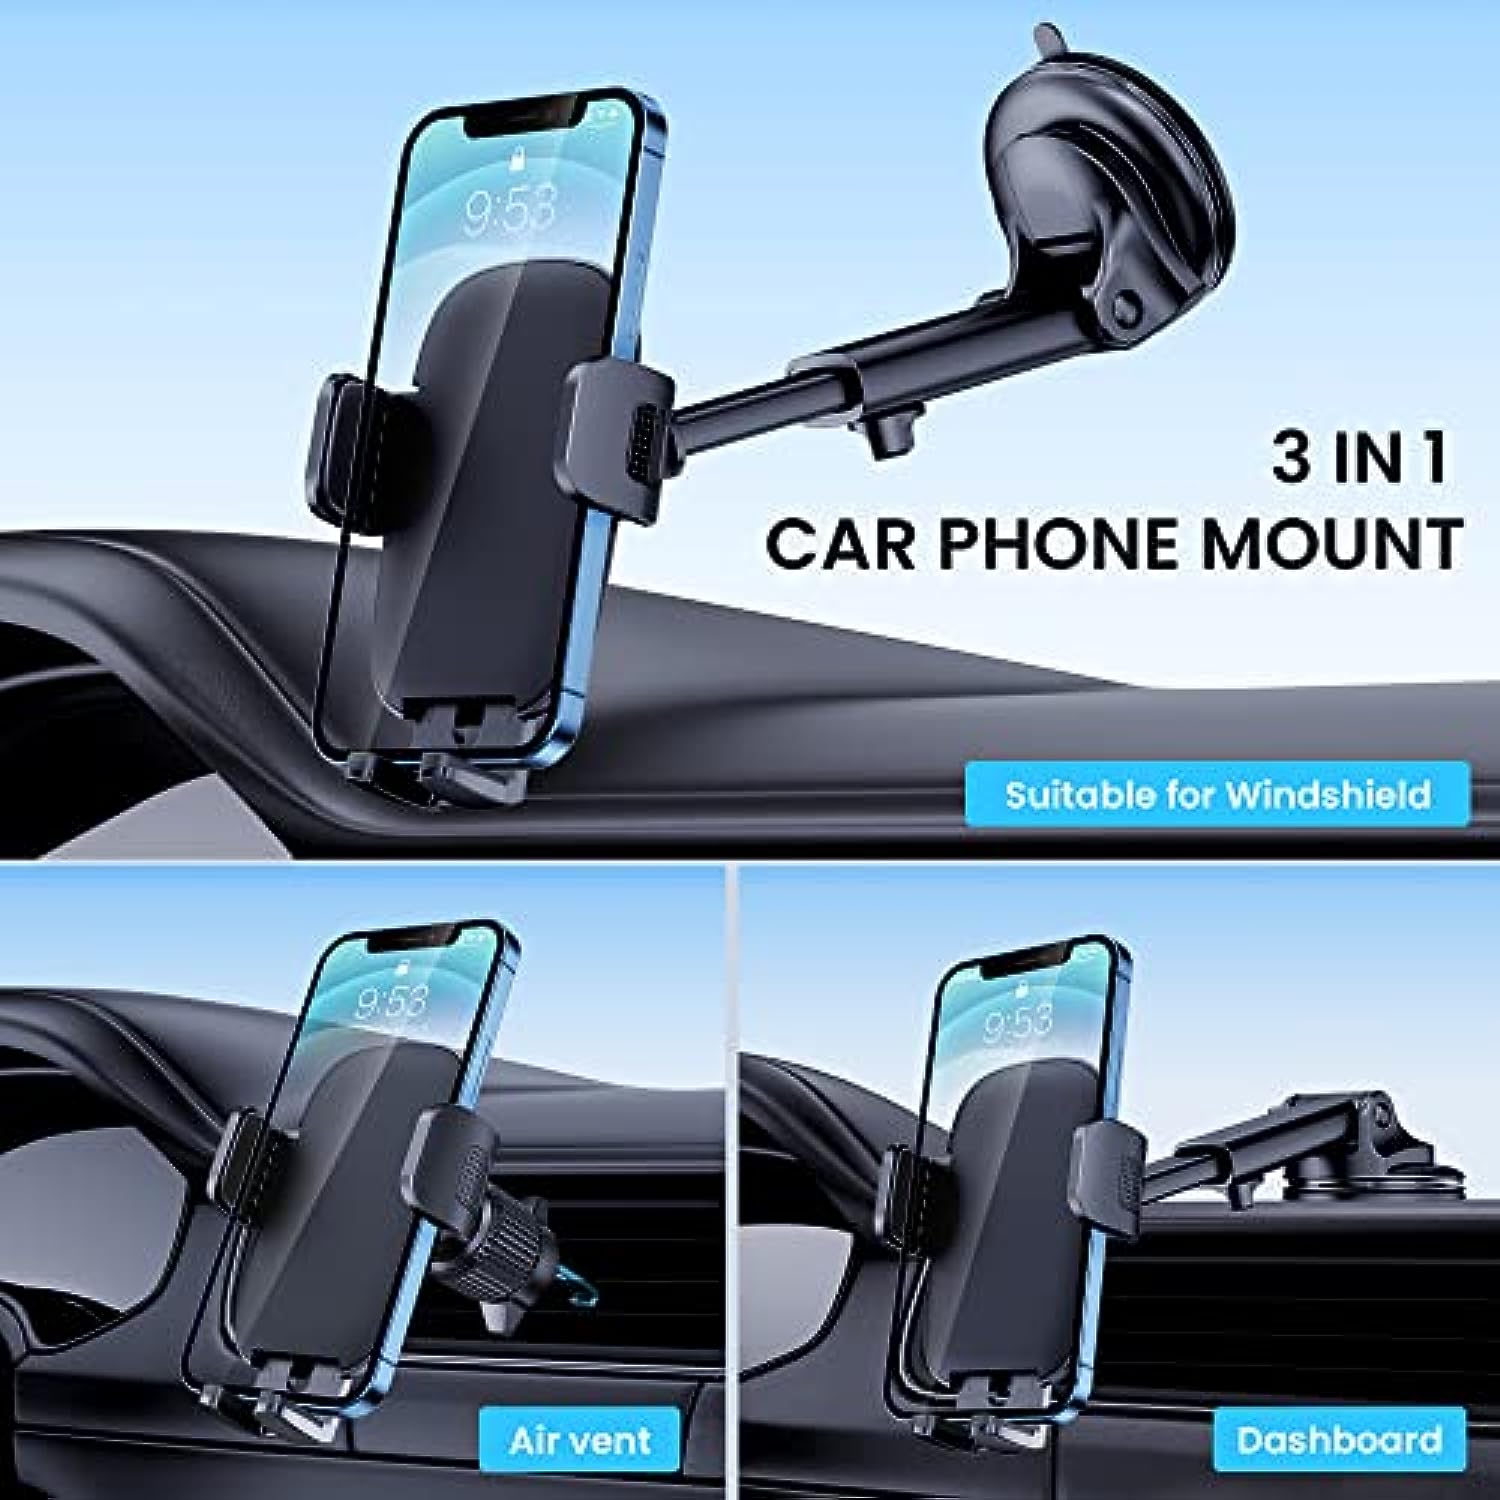 Military-Grade Suction & Stable Hook Phone Mount Fit for iPhone & Android Phone